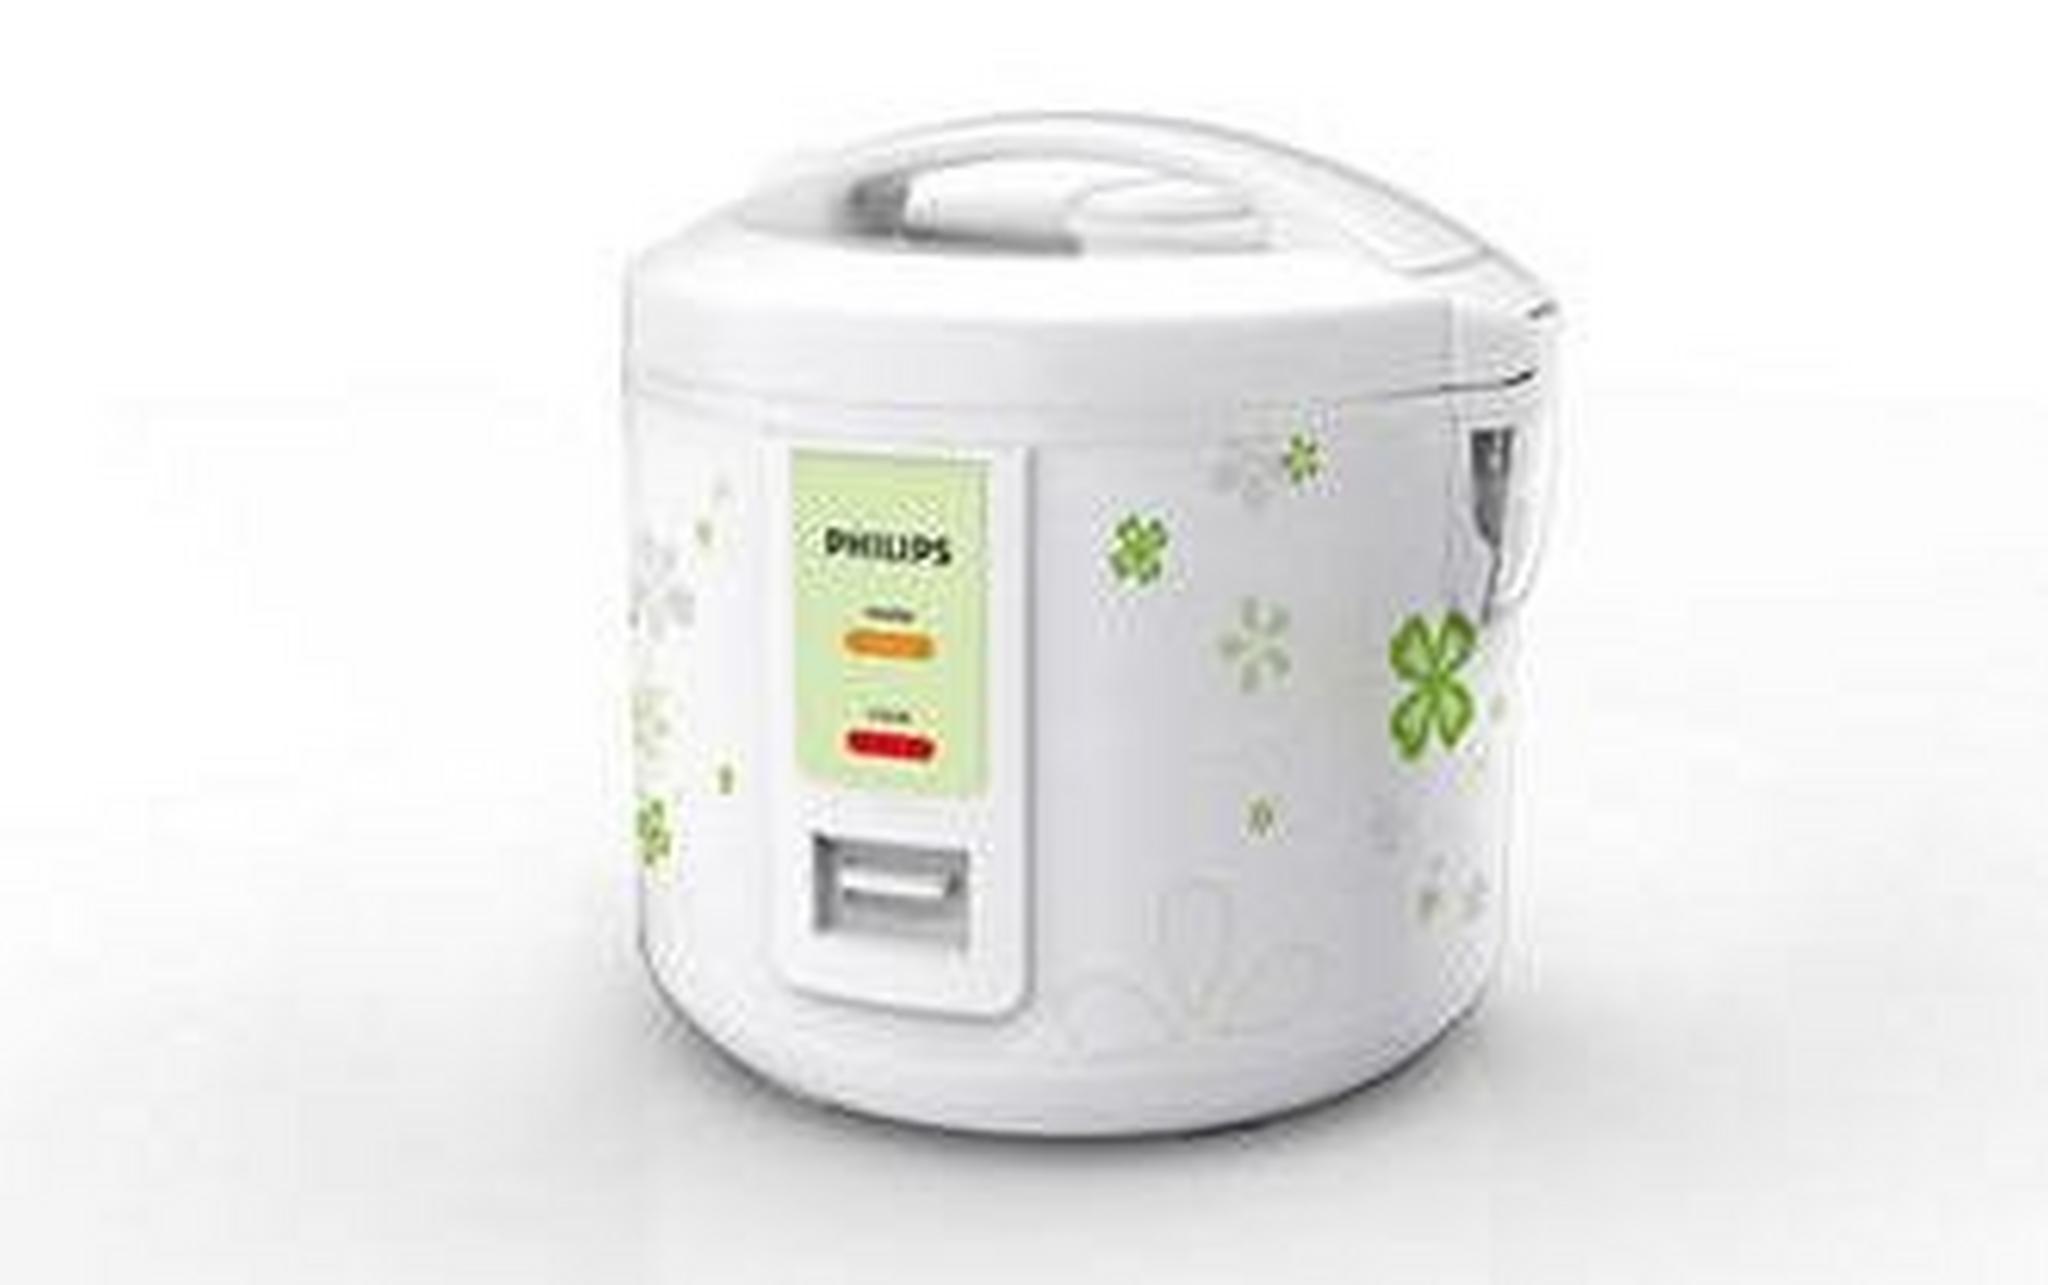 Philips Rice Cooker 500W 1Litre - HD3011/56